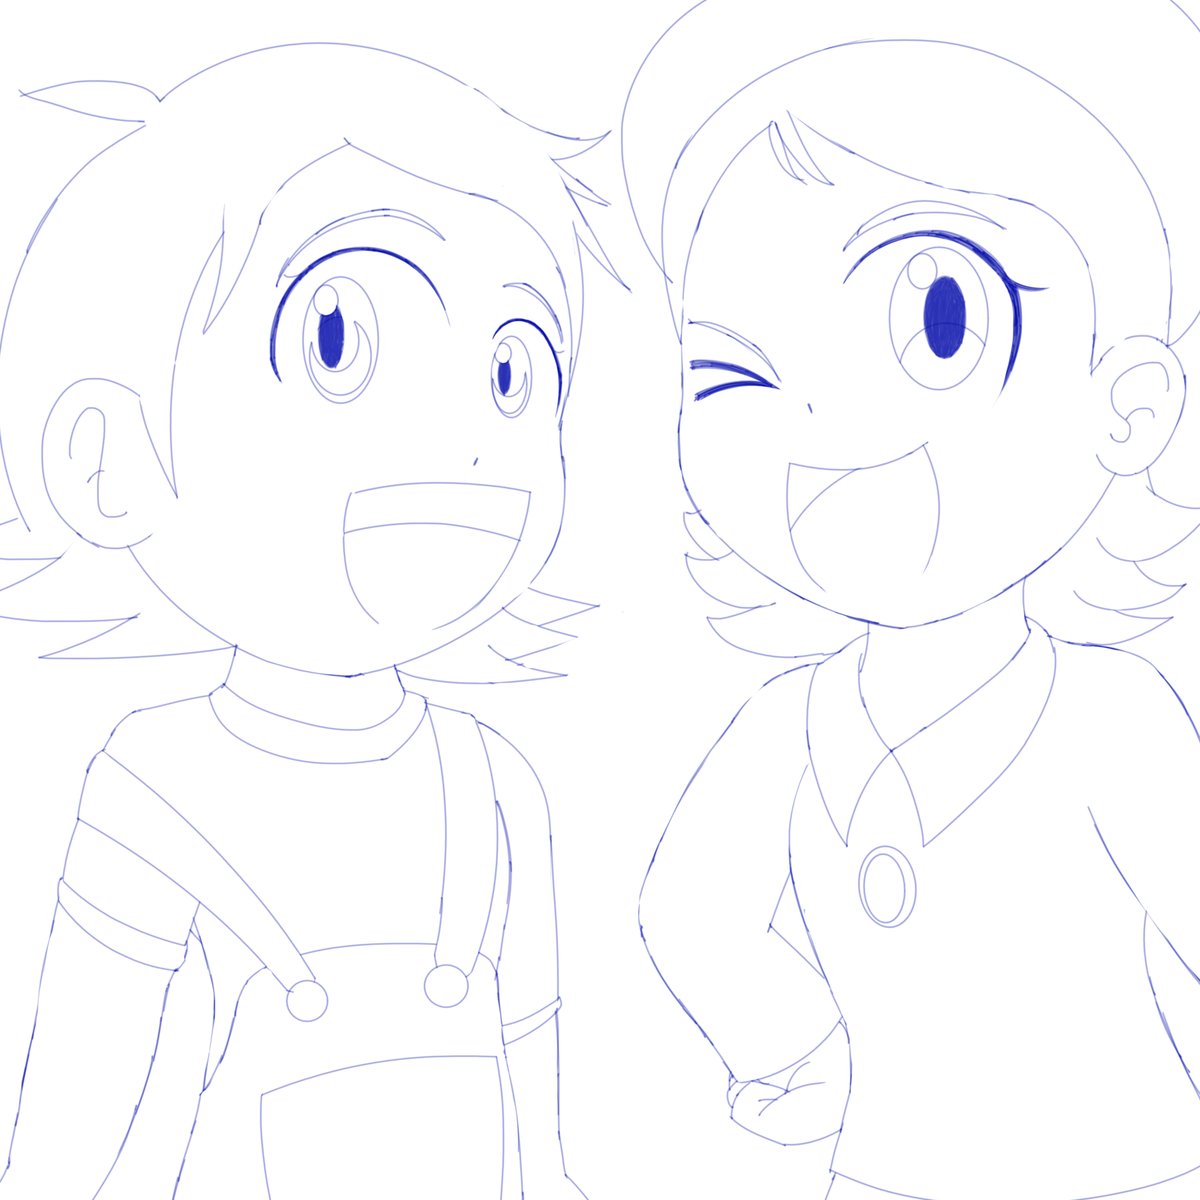 it Aiko and Adeleine!
once im off of work gonna refine it further.